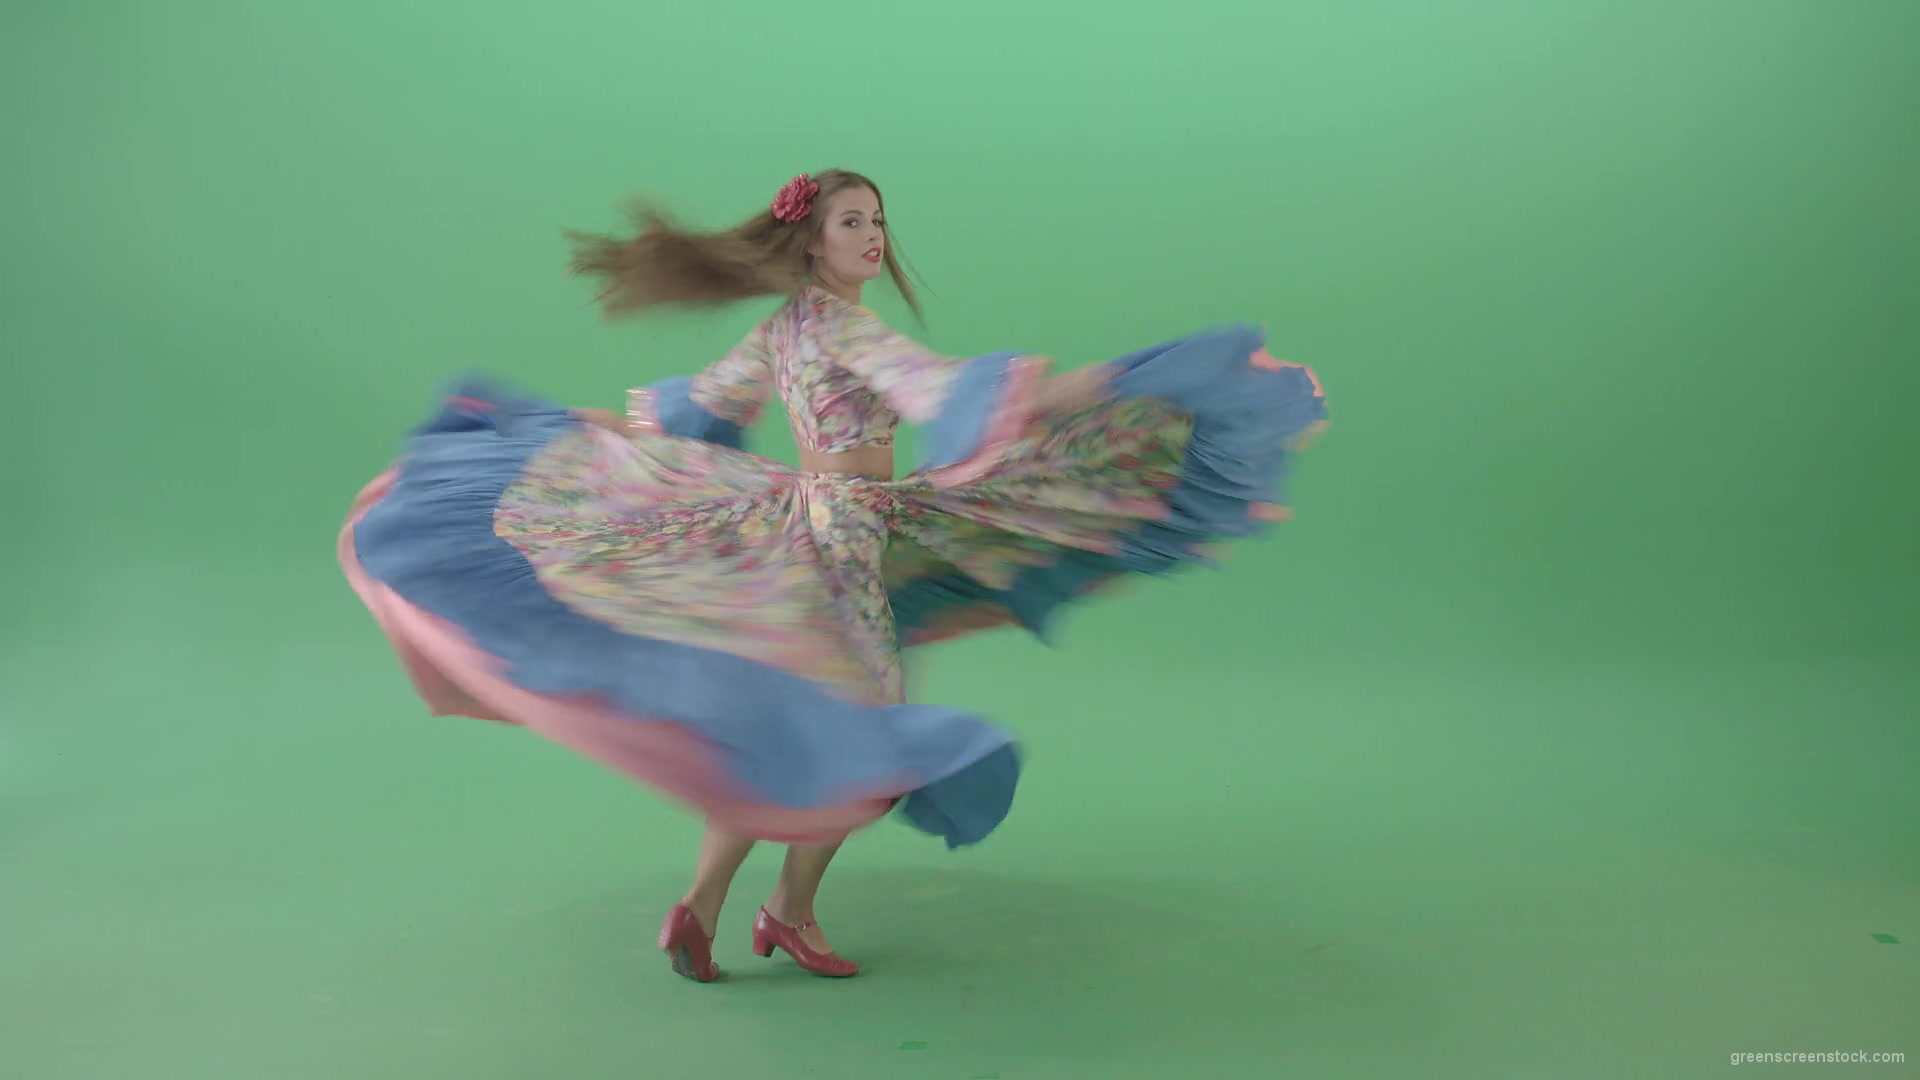 Elegant-movement-by-Gypsy-girl-in-moldova-costume-isolated-on-green-screen-4K-Video-Footage-clip-1920_006 Green Screen Stock